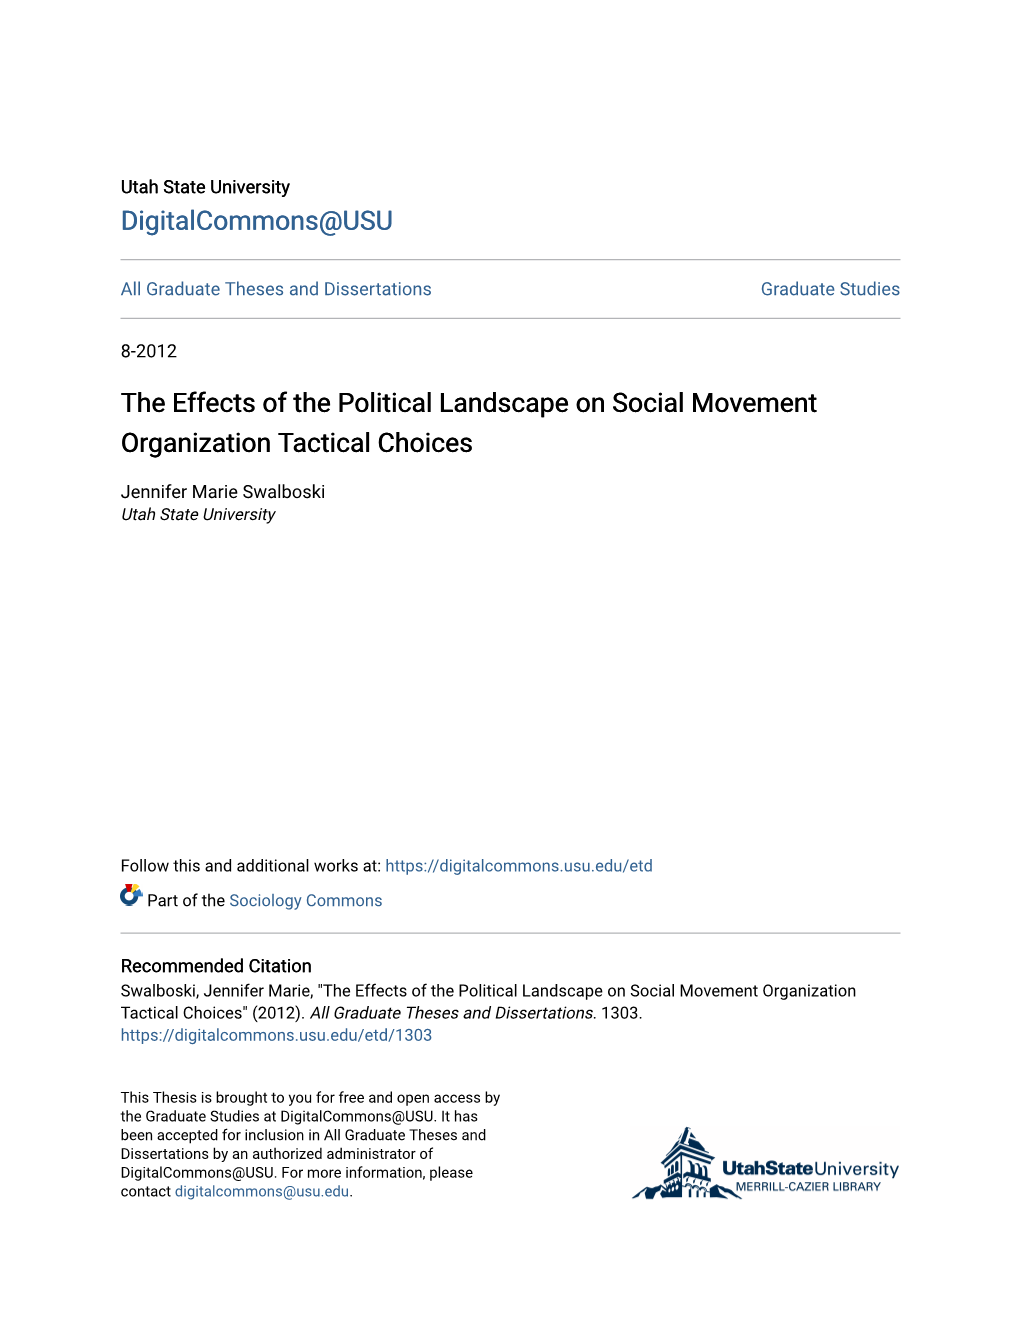 The Effects of the Political Landscape on Social Movement Organization Tactical Choices